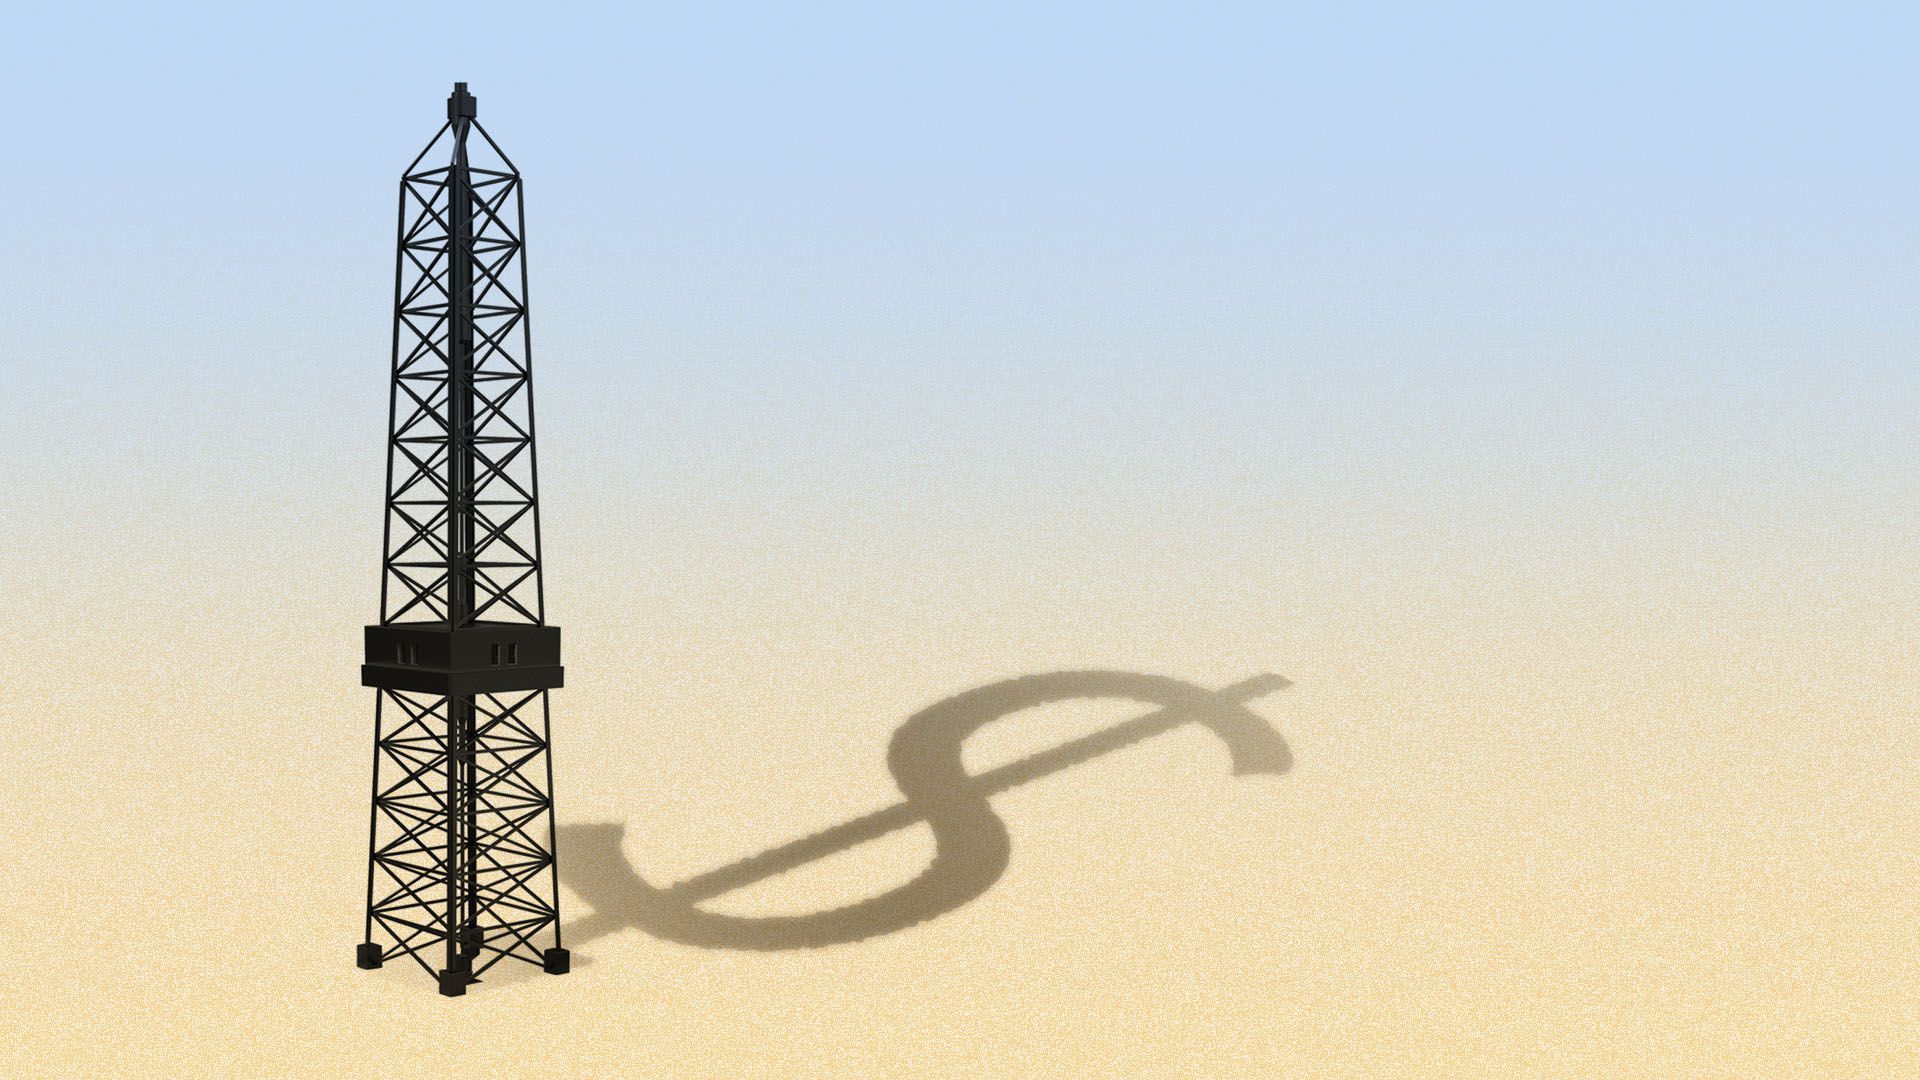 Illustration of an oil rig in the Saudi desert casting a shadow in the shape of a dollar sign.